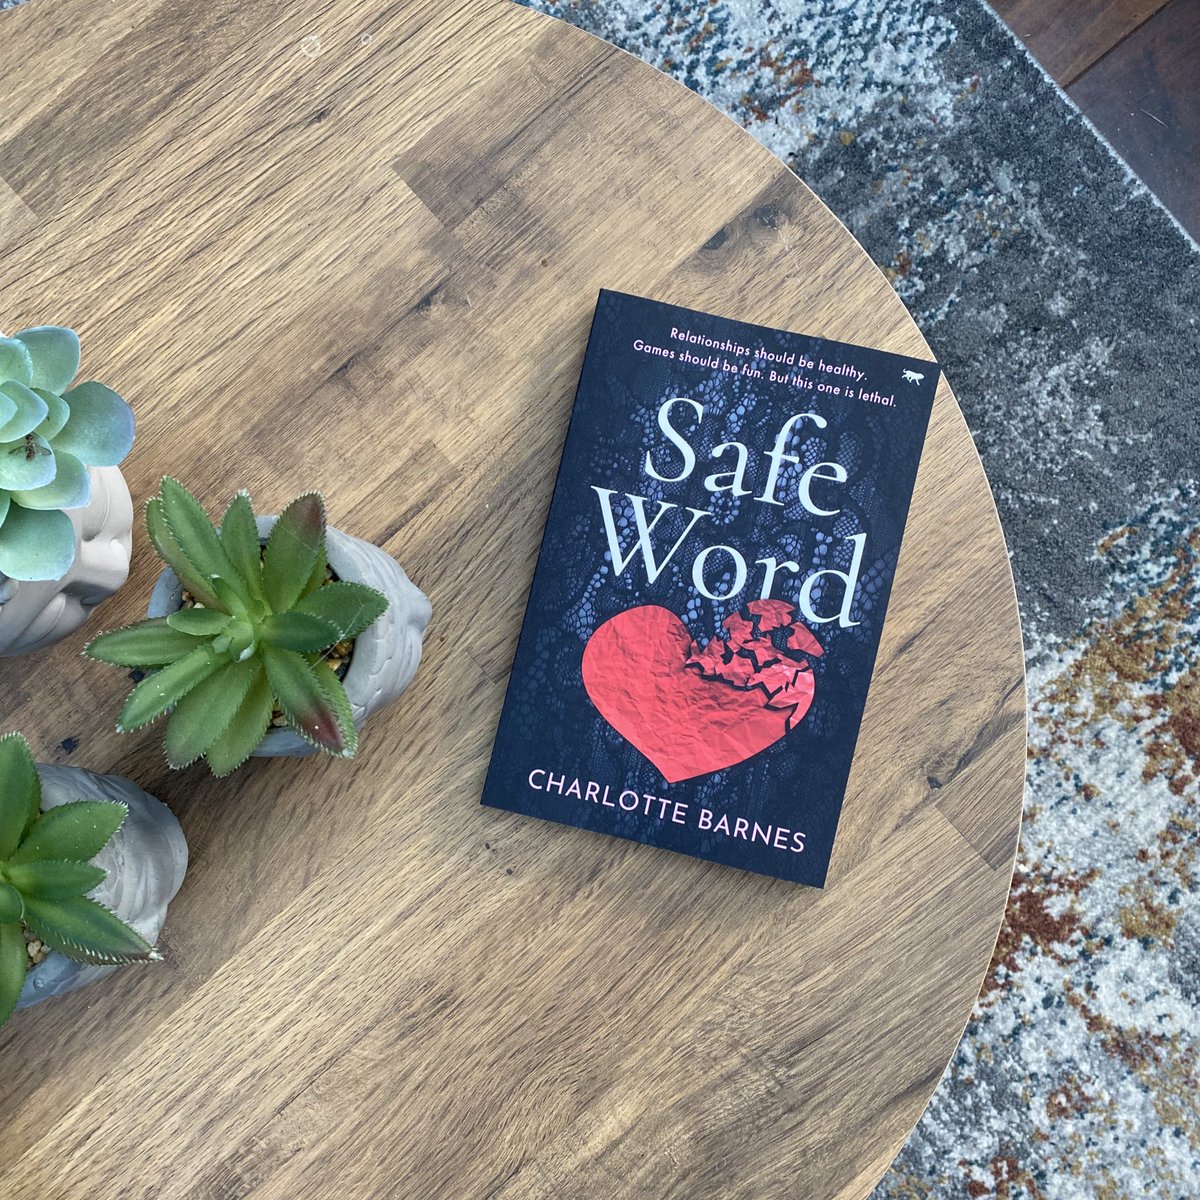 “a gripping book with a good twist...” “I thought the deviousness of the characters was genius...” “A fast-paced, intriguing read, highly recommended!” If you fancy settling down with a twisted thriller this weekend, get ordering while it’s still 99p 👉🏻 geni.us/SafeWordCover